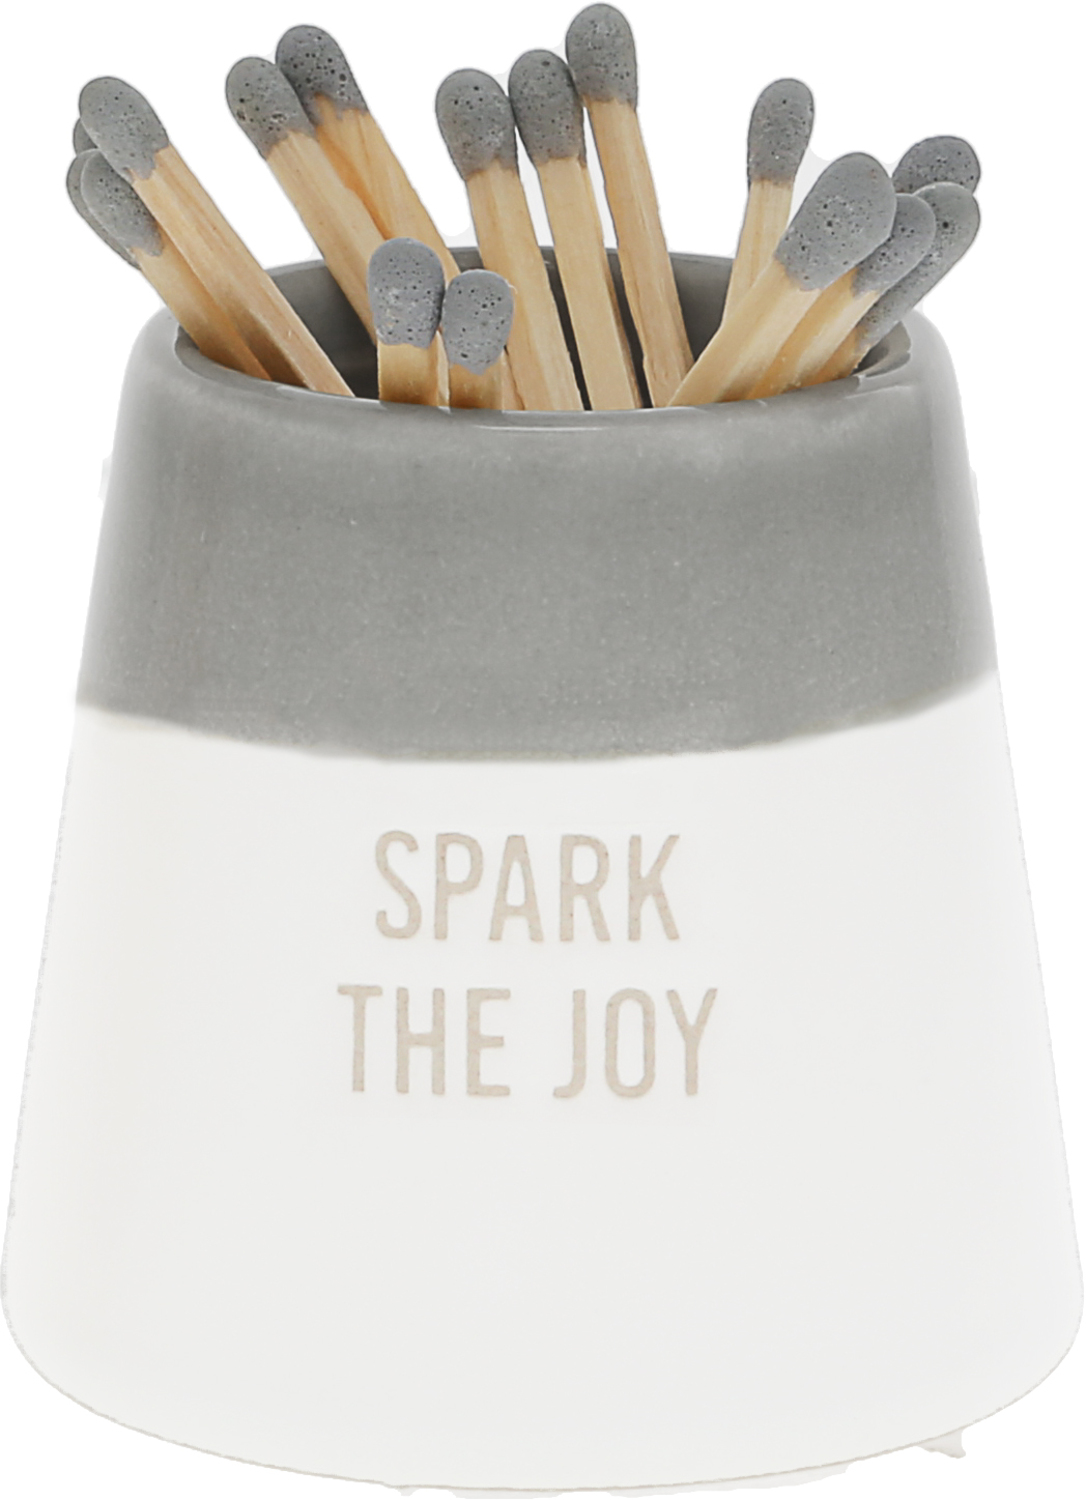 Spark The Joy by Love You - Spark The Joy - 2.25" Match Holder and Matches